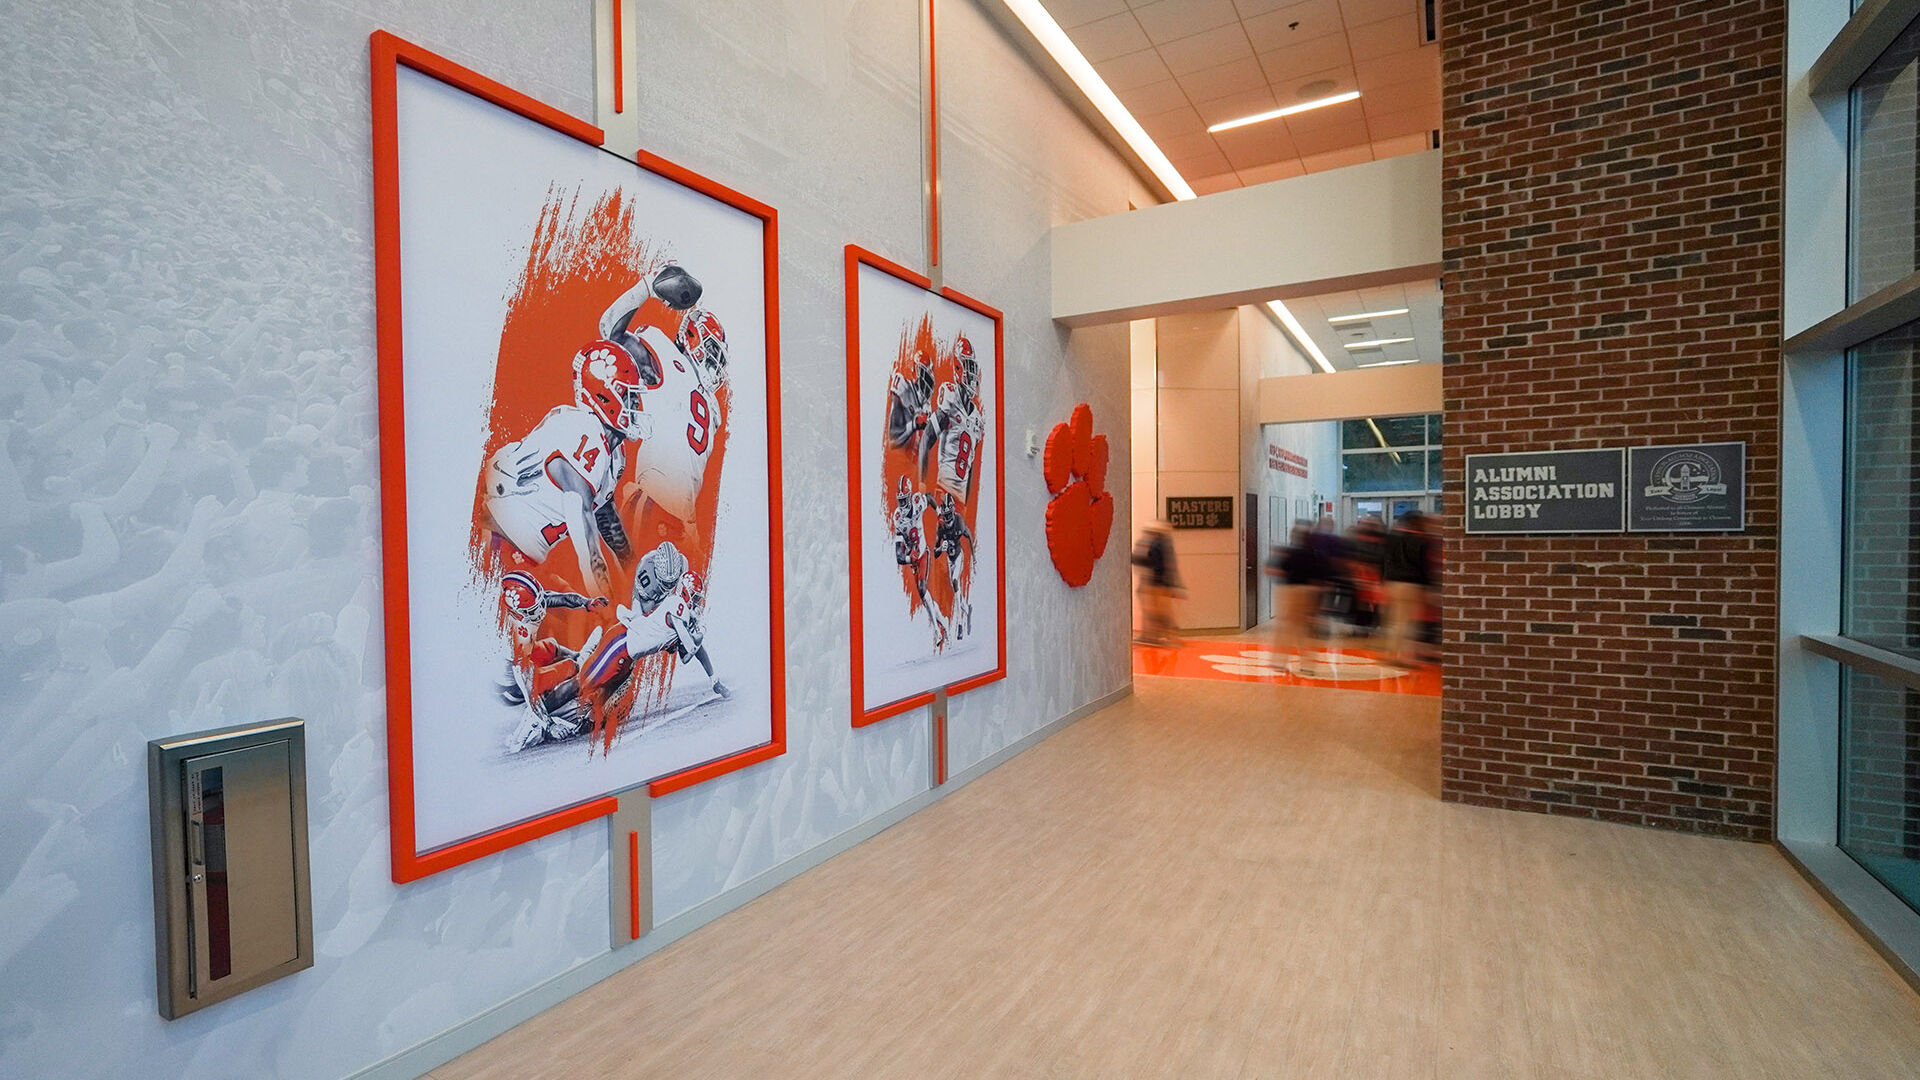 Framed Wall Graphics and signage at Clemson's Masters Club